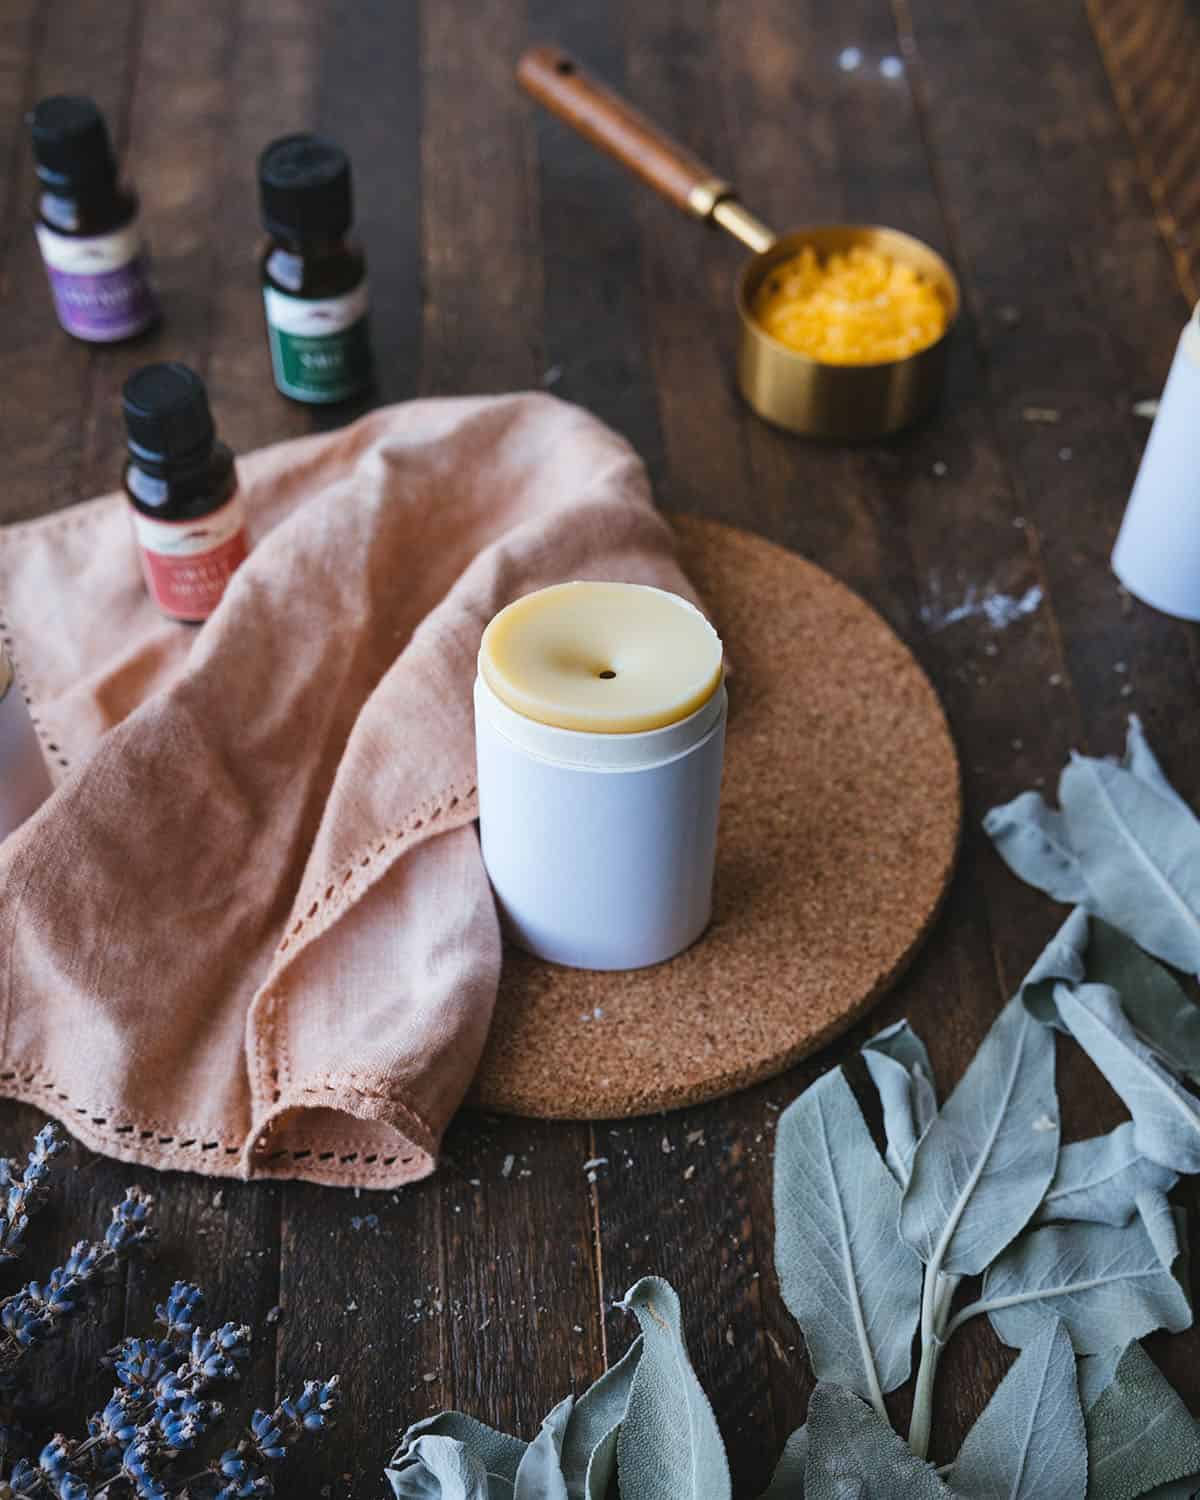 Homemade deodorant in a cardboard tube surrounded with a natural cloth napkin and essential oils, sage leaves, and other ingredients on a dark wood surface.